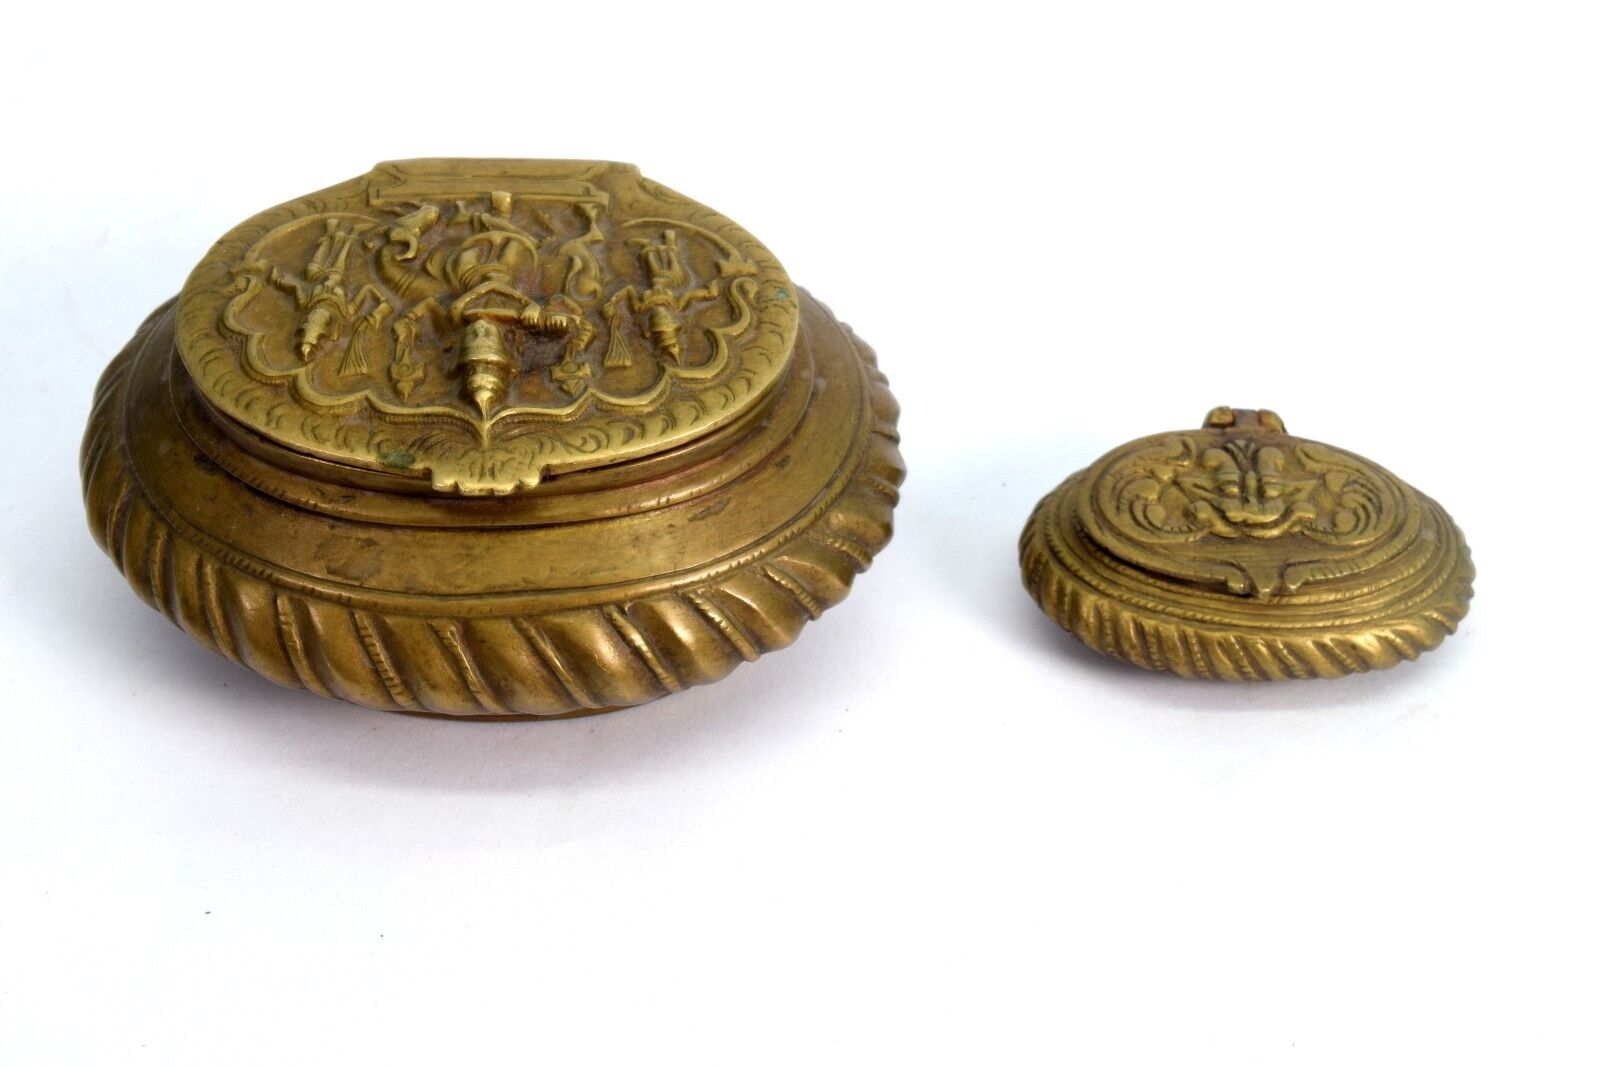 Extreme Old Antique God Figurative Brass Early Period Snuffs Boxes.  G53-520